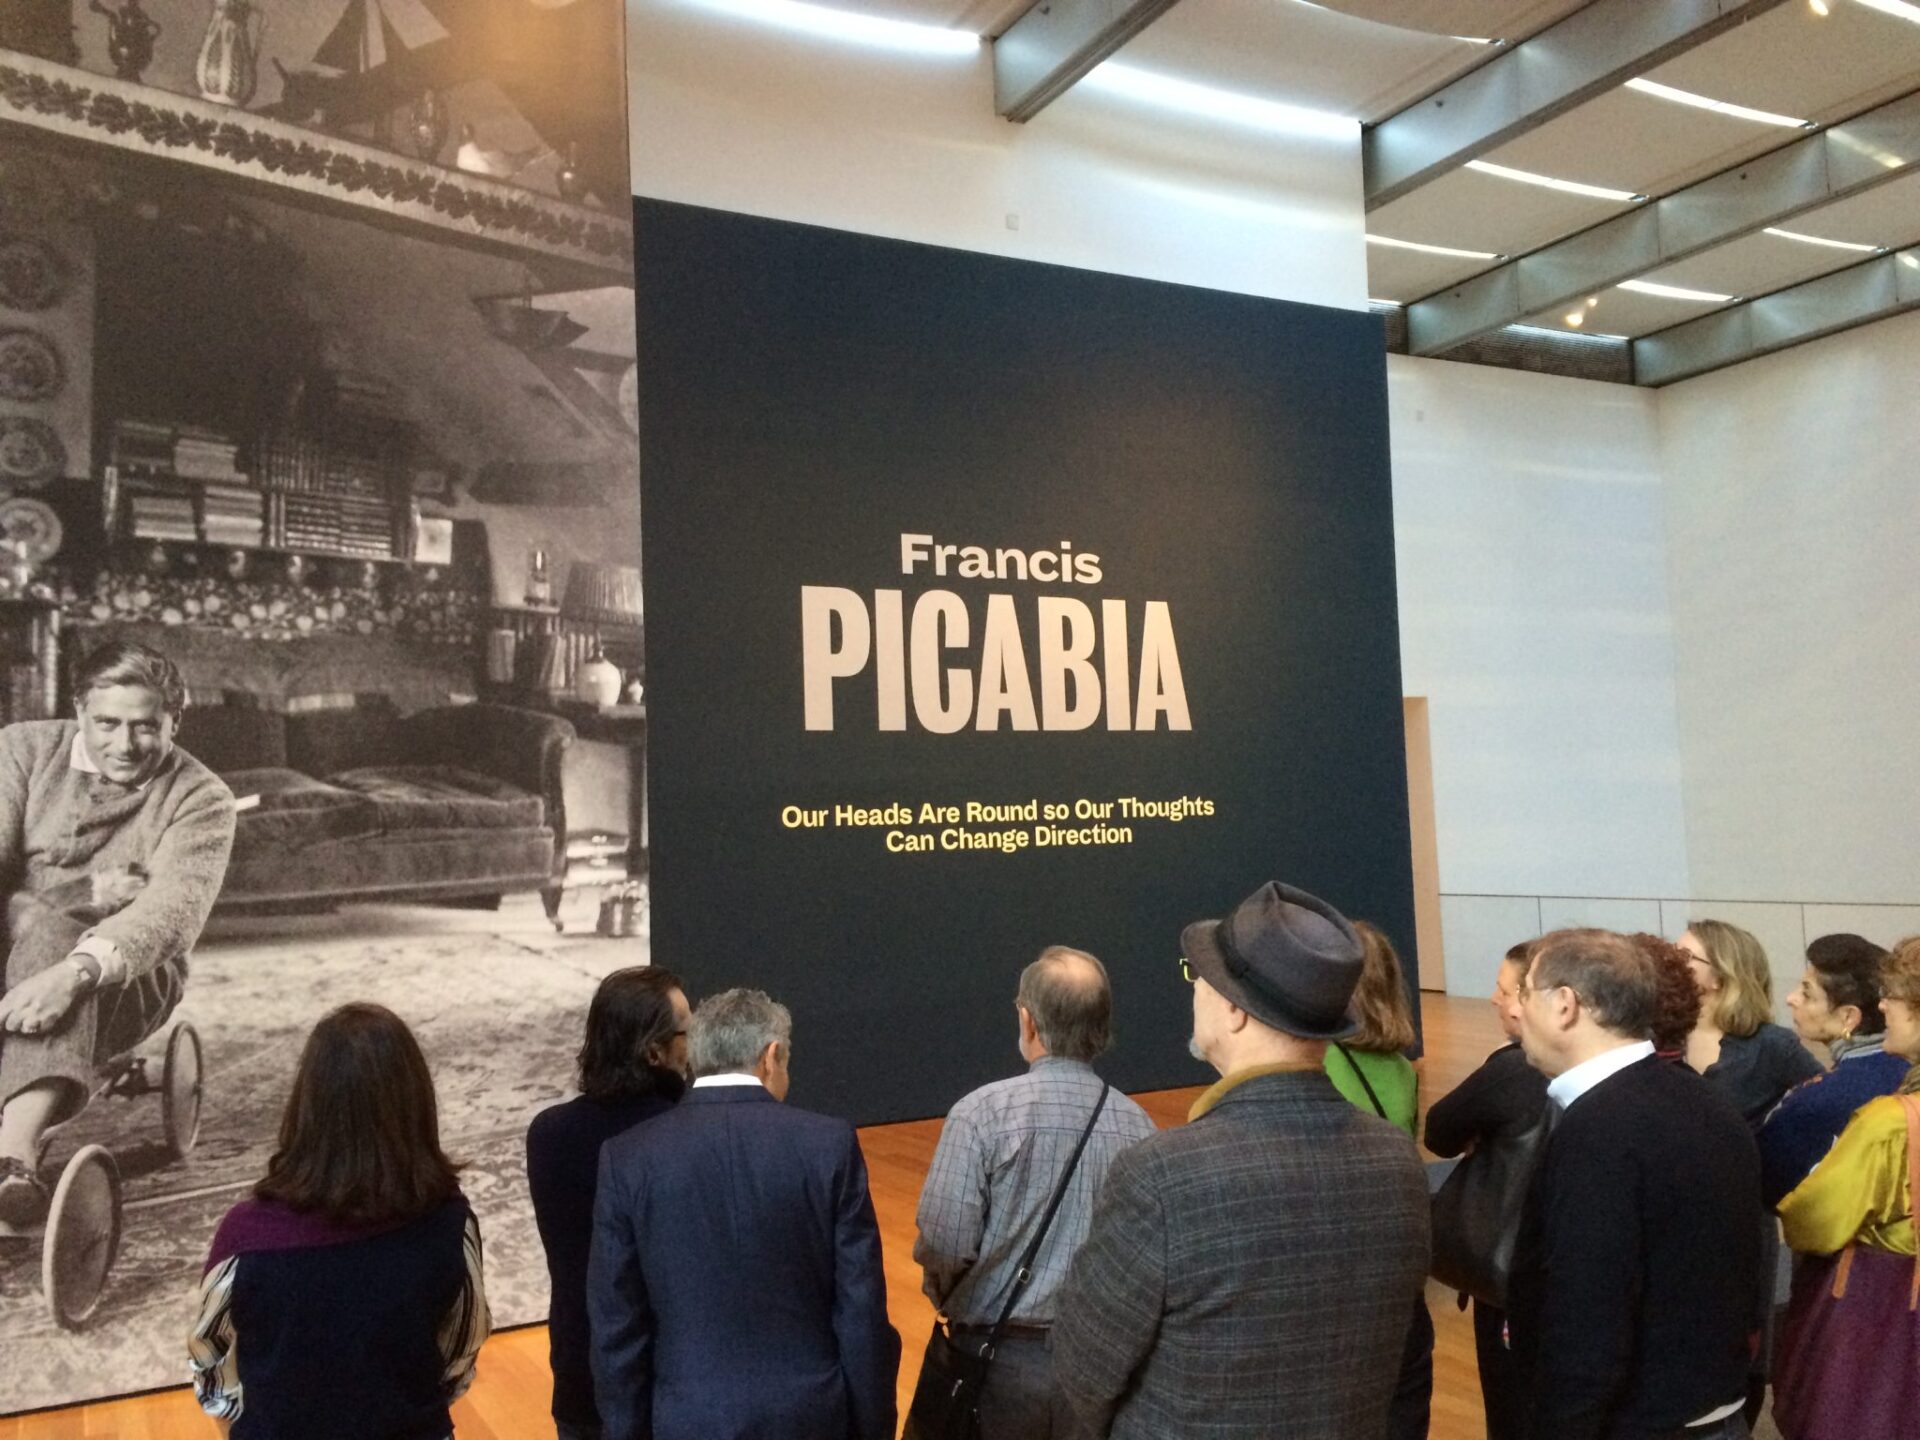 CIMA members enjoying a private tour of Picabia, led by Assistant Curator Talia Kwartler.